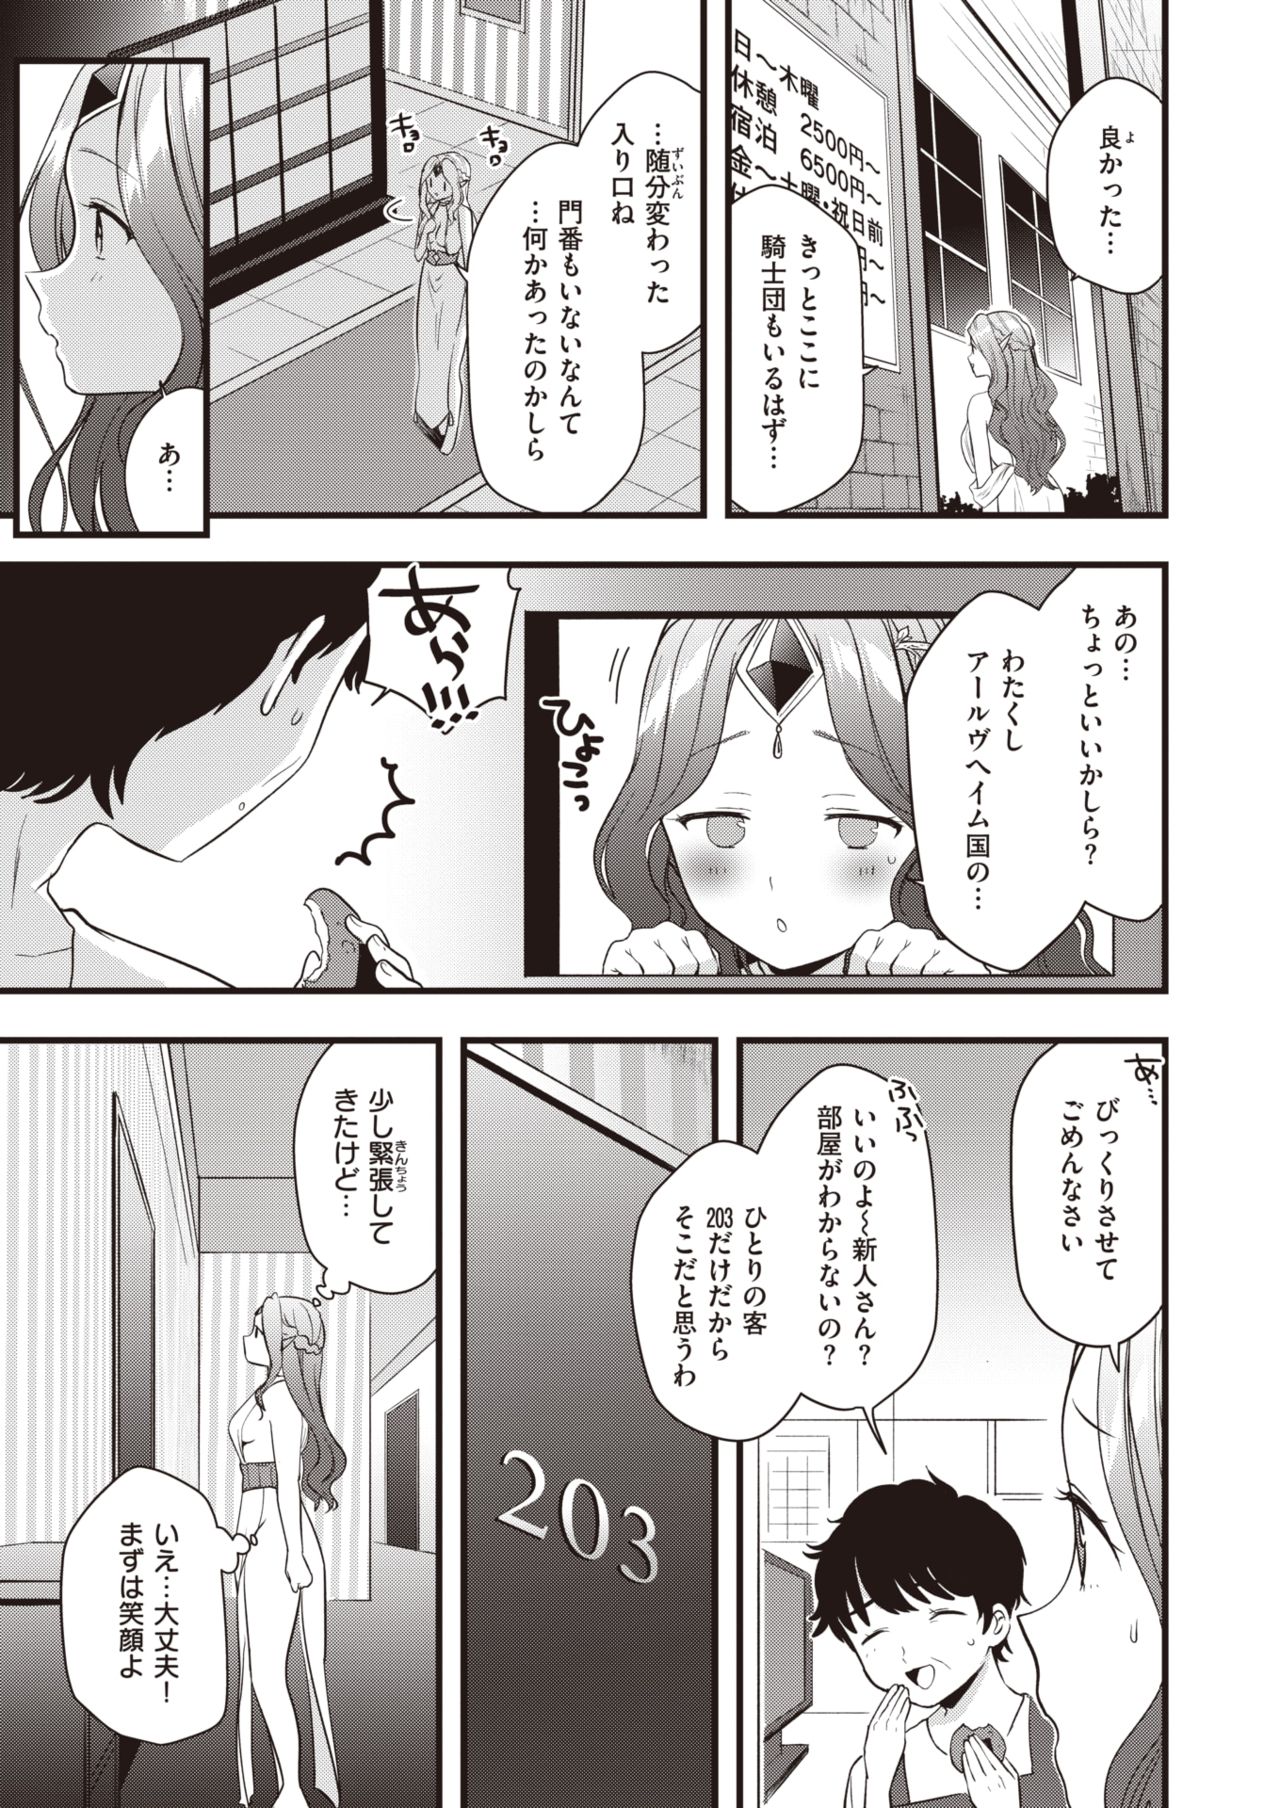 WEEKLY快楽天 2021 No.30